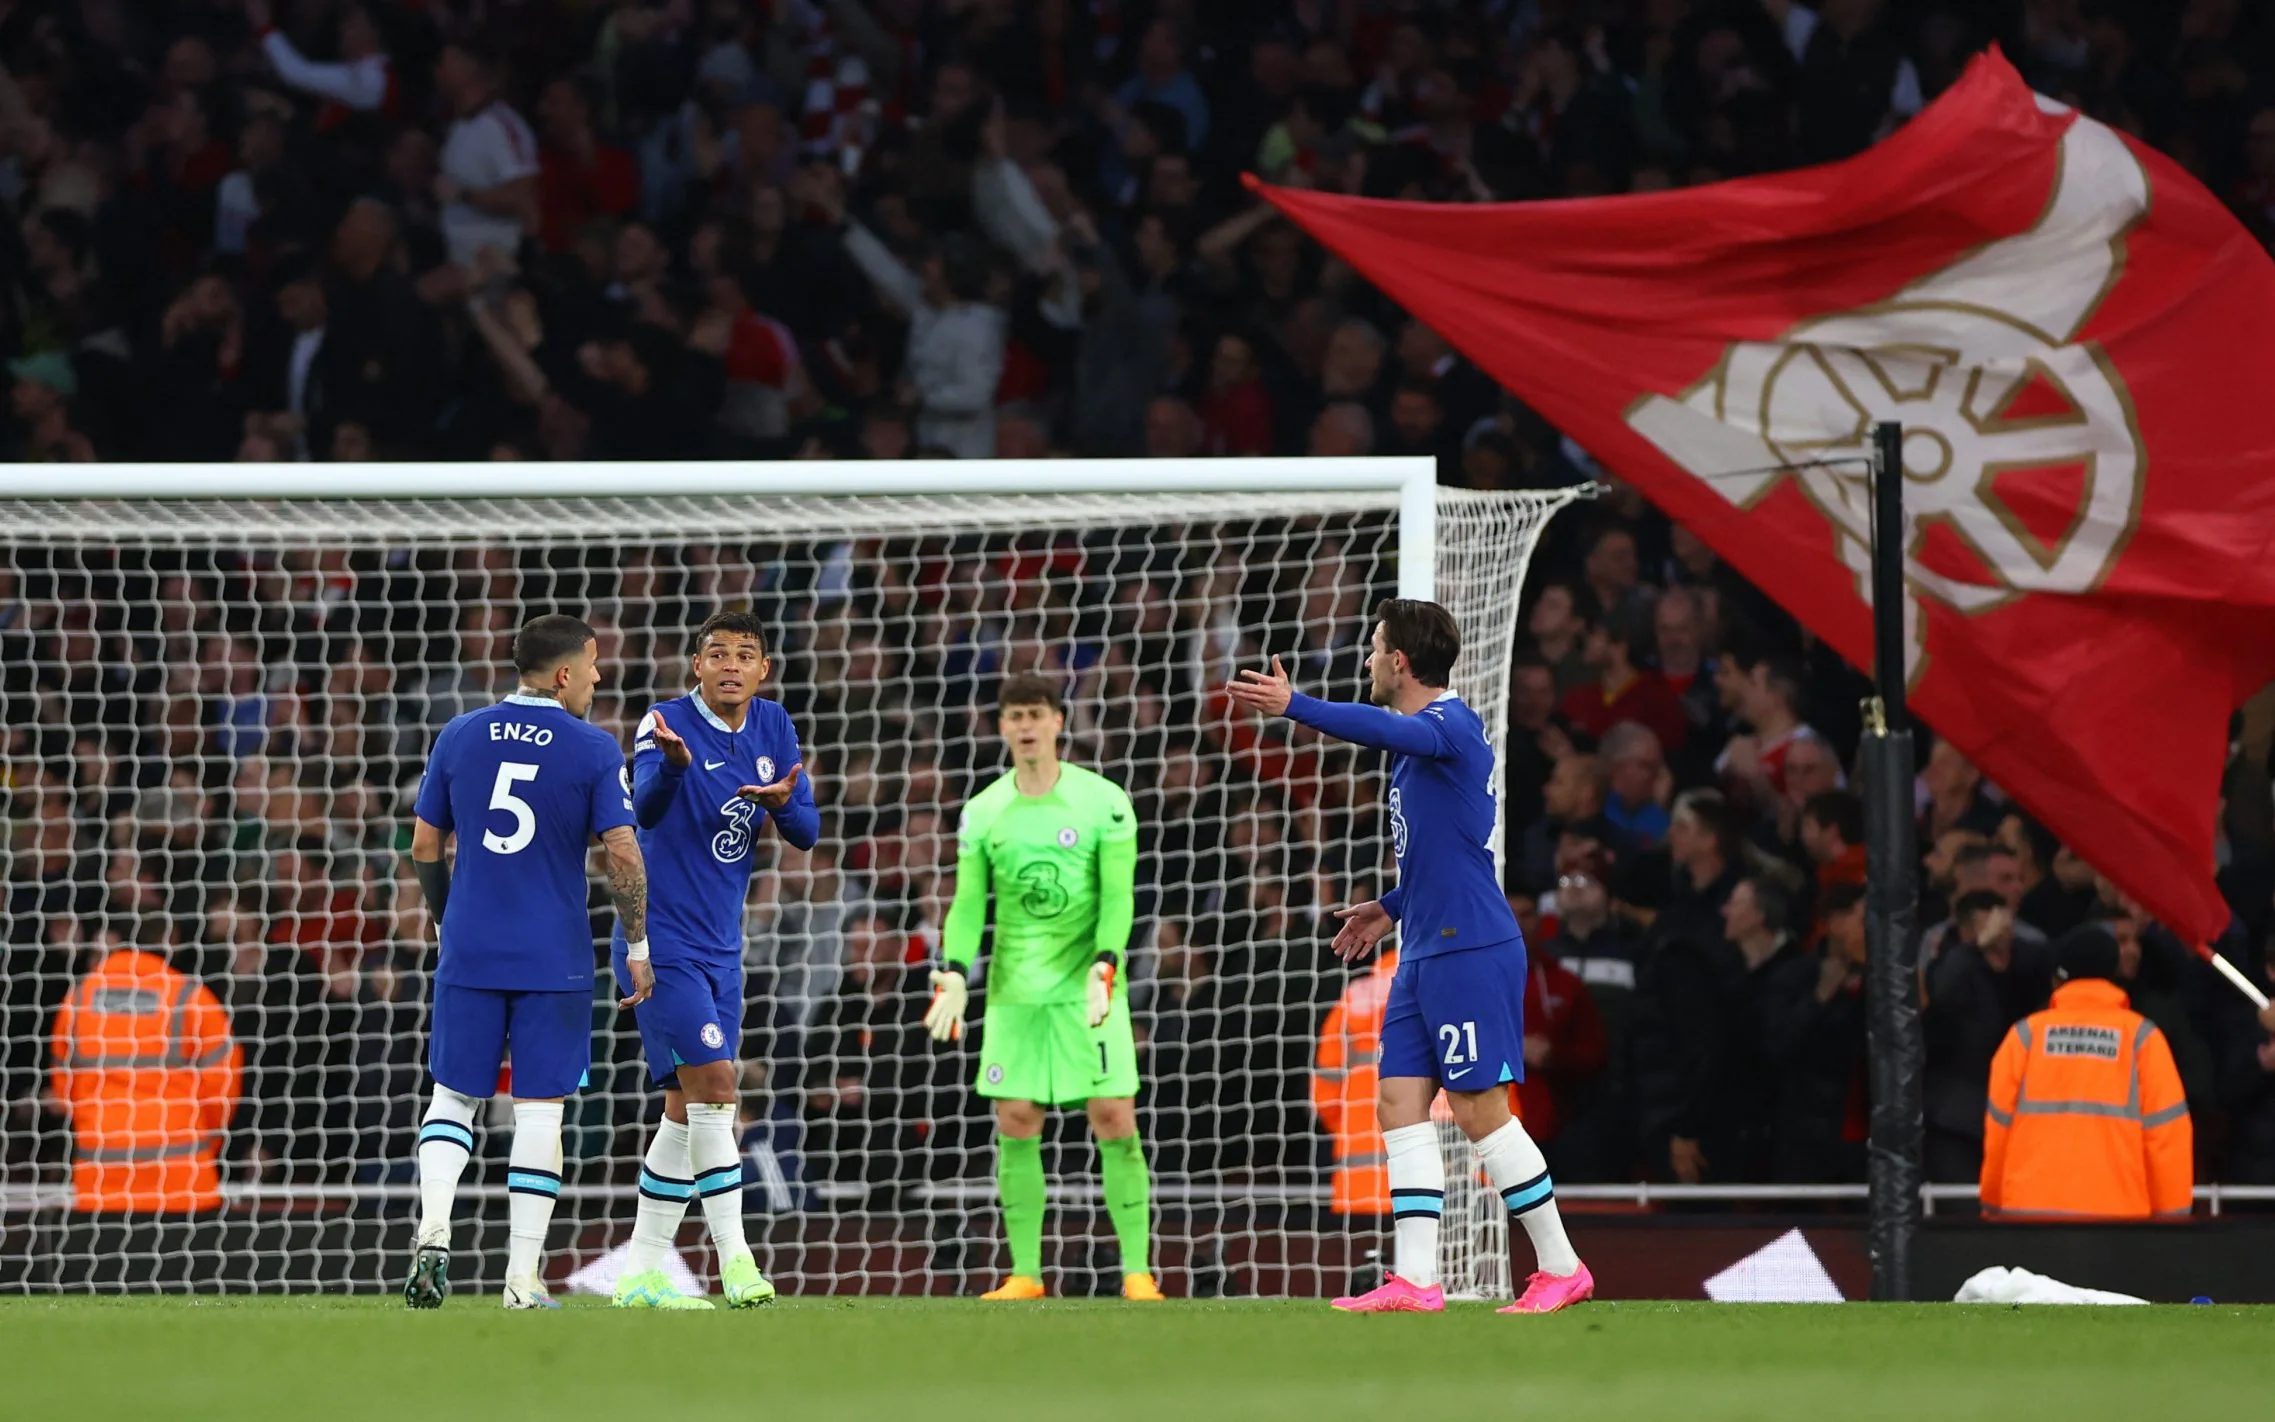 Chelsea players question one another during the league match against Arsenal at the Emirates